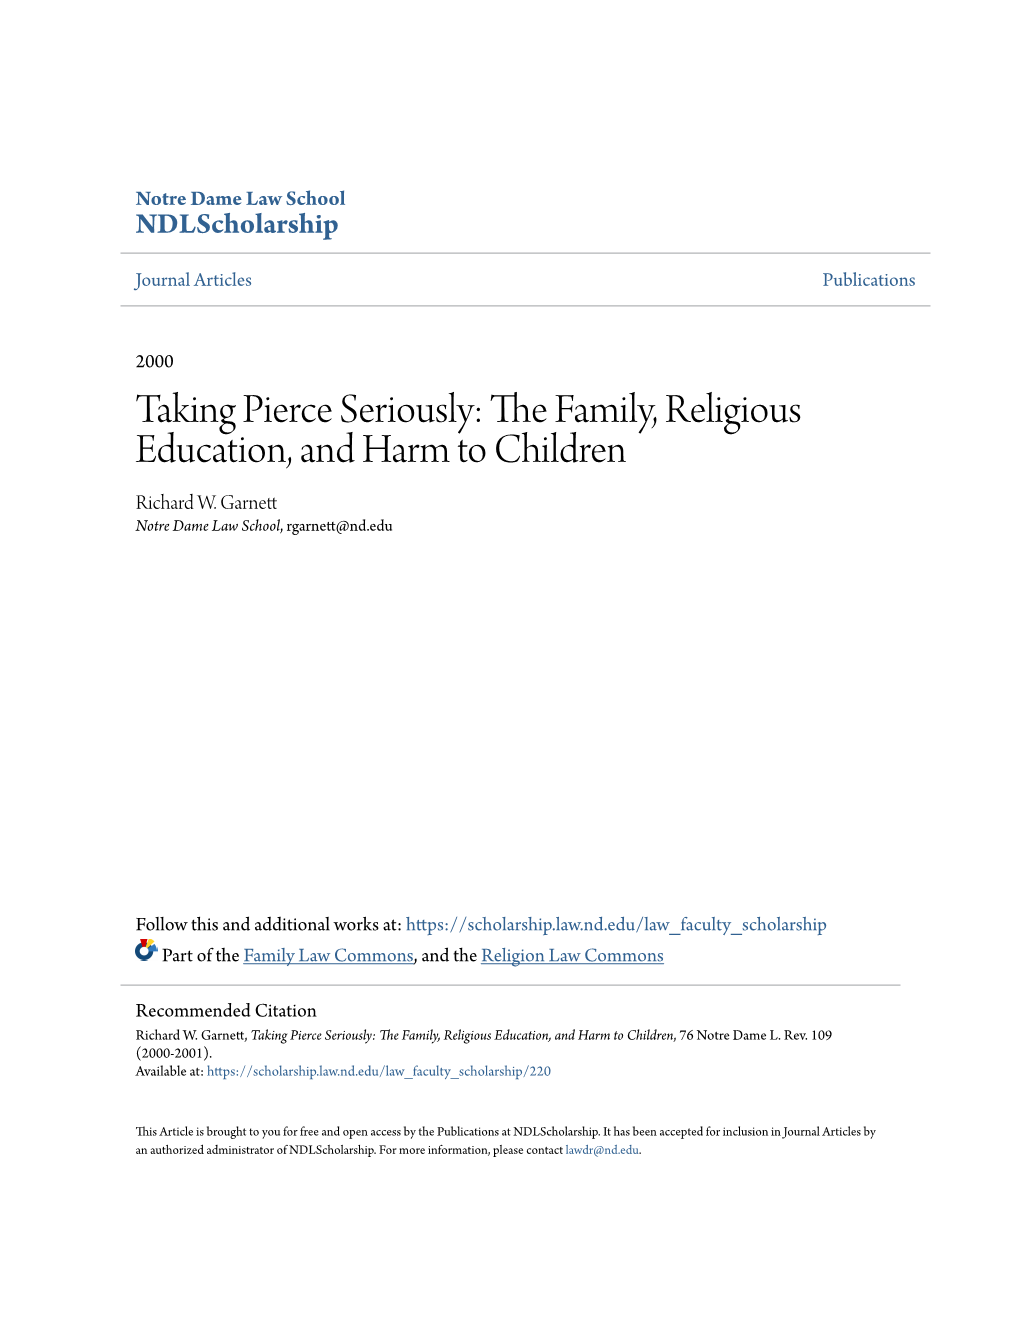 The Family, Religious Education, and Harm to Children, 76 Notre Dame L